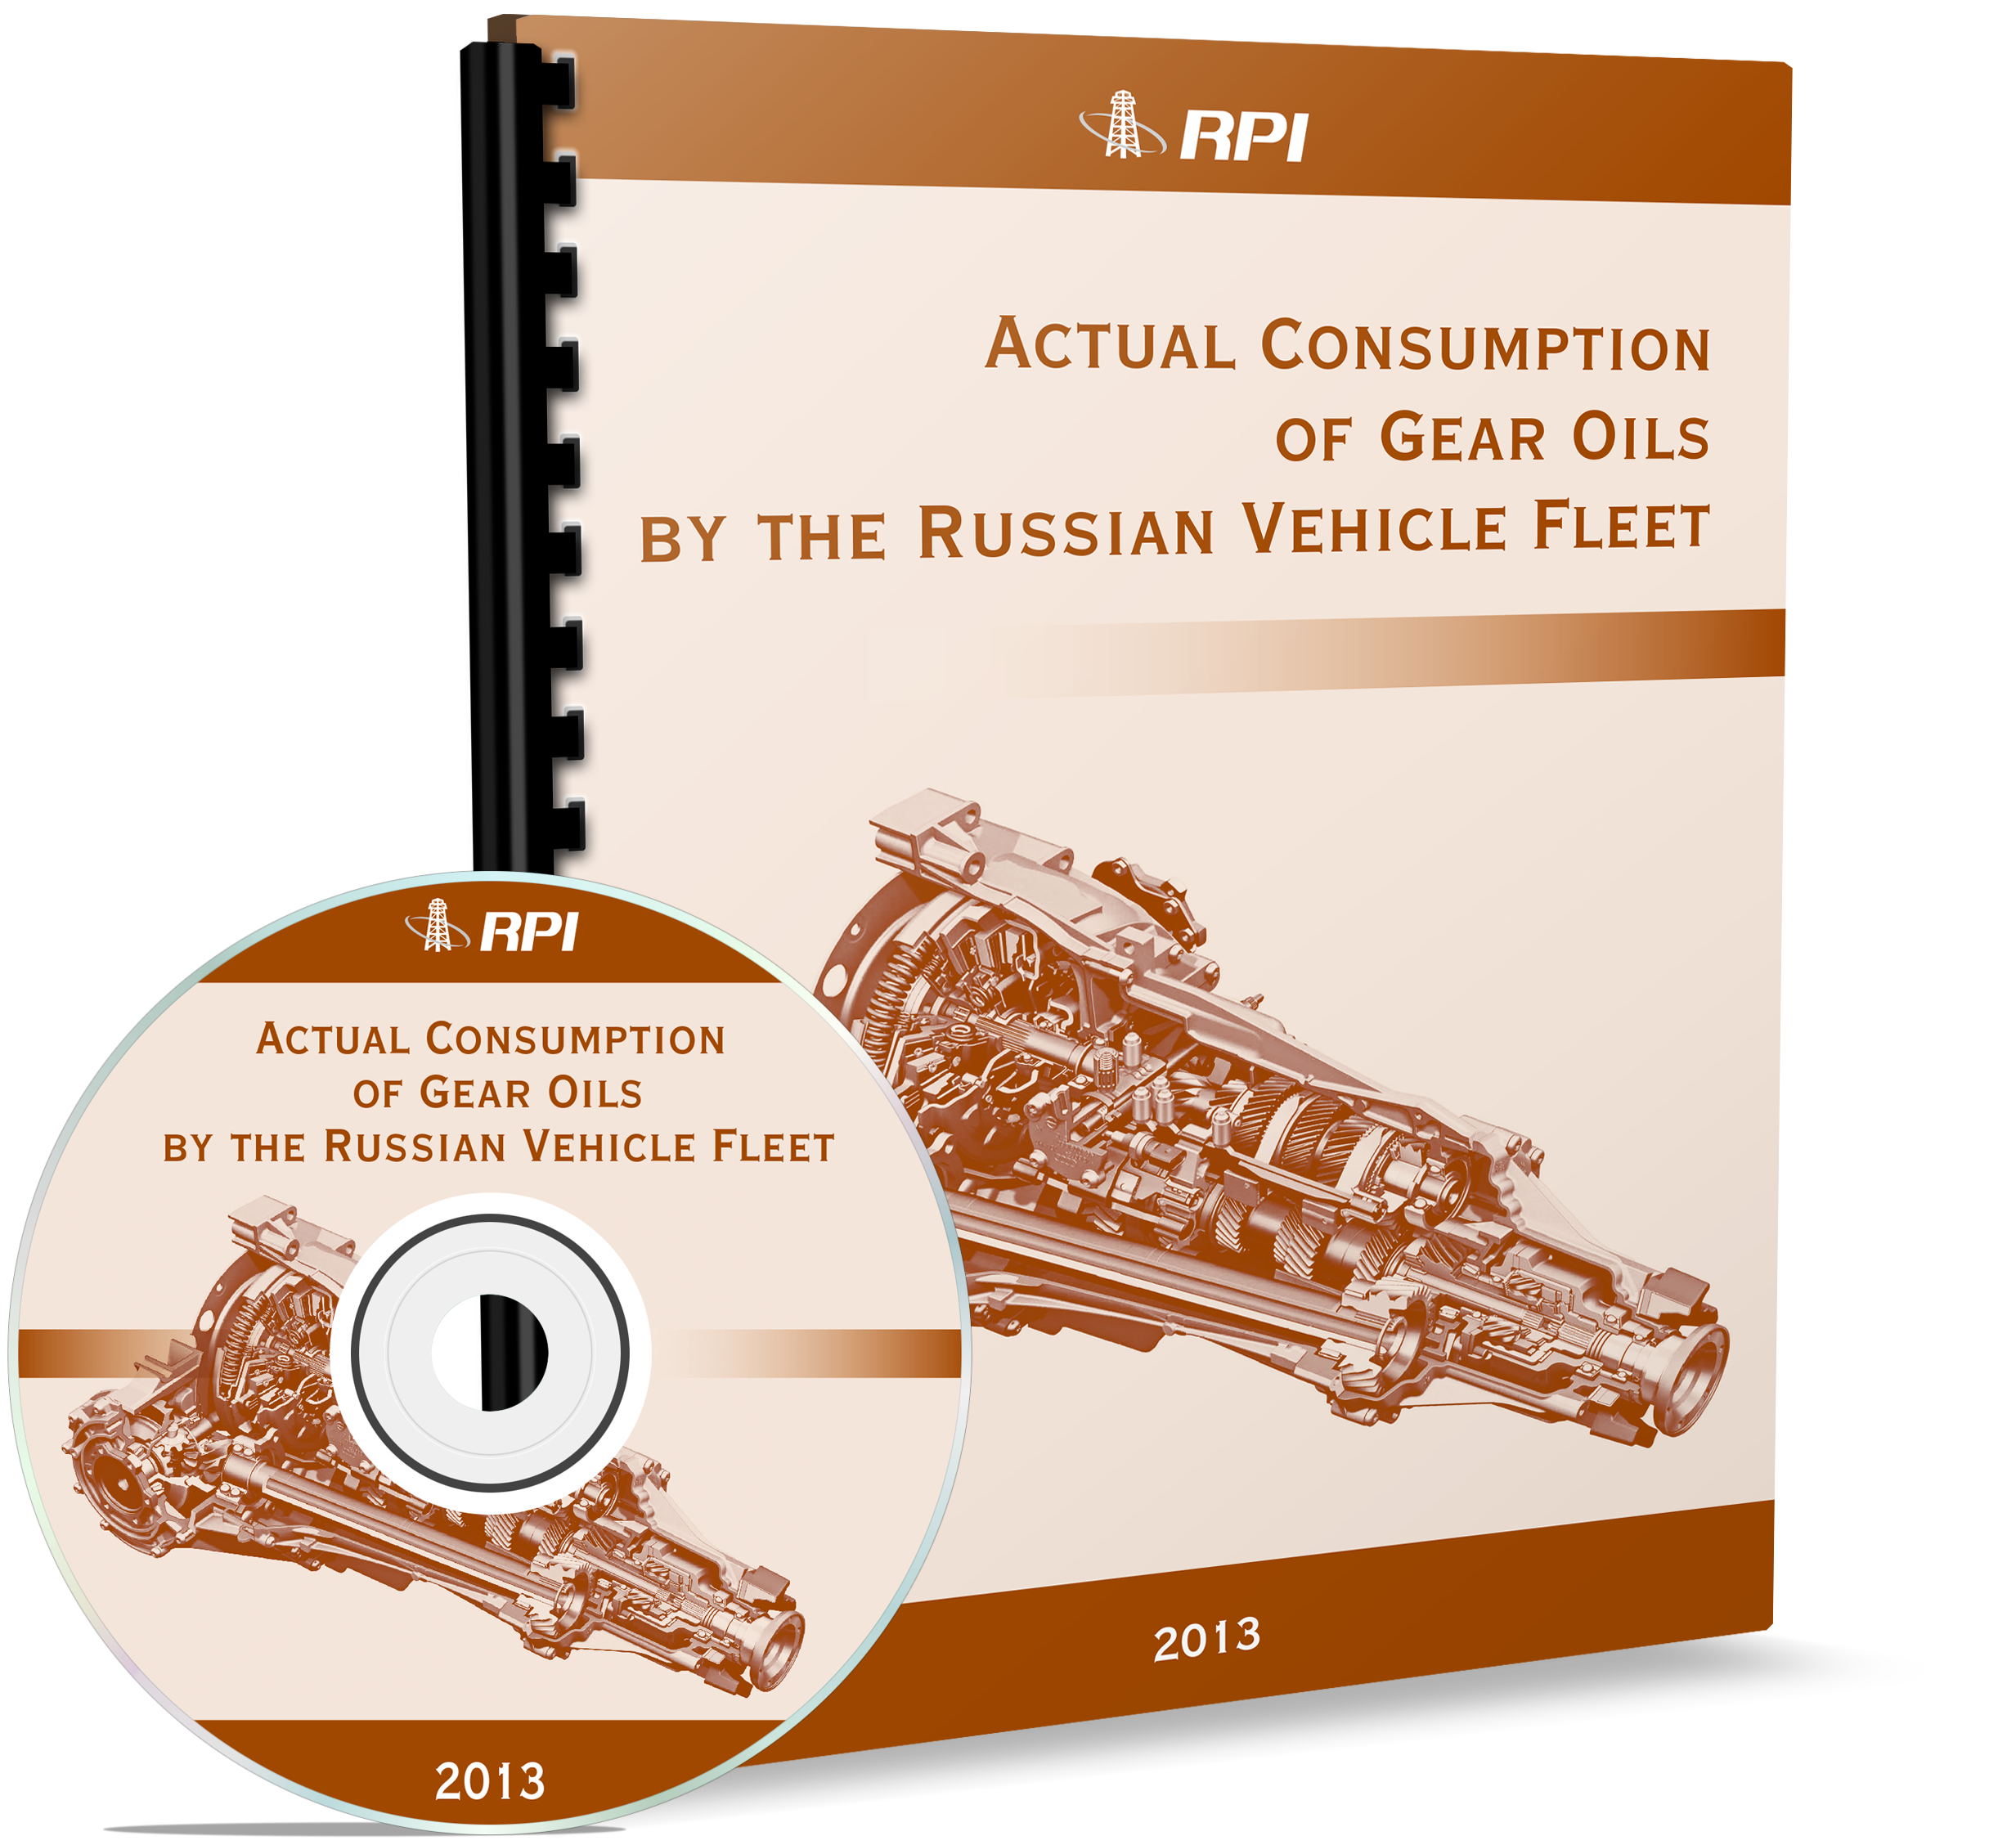 Actual Consumption of Gear Oils by the Russian Vehicle Fleet